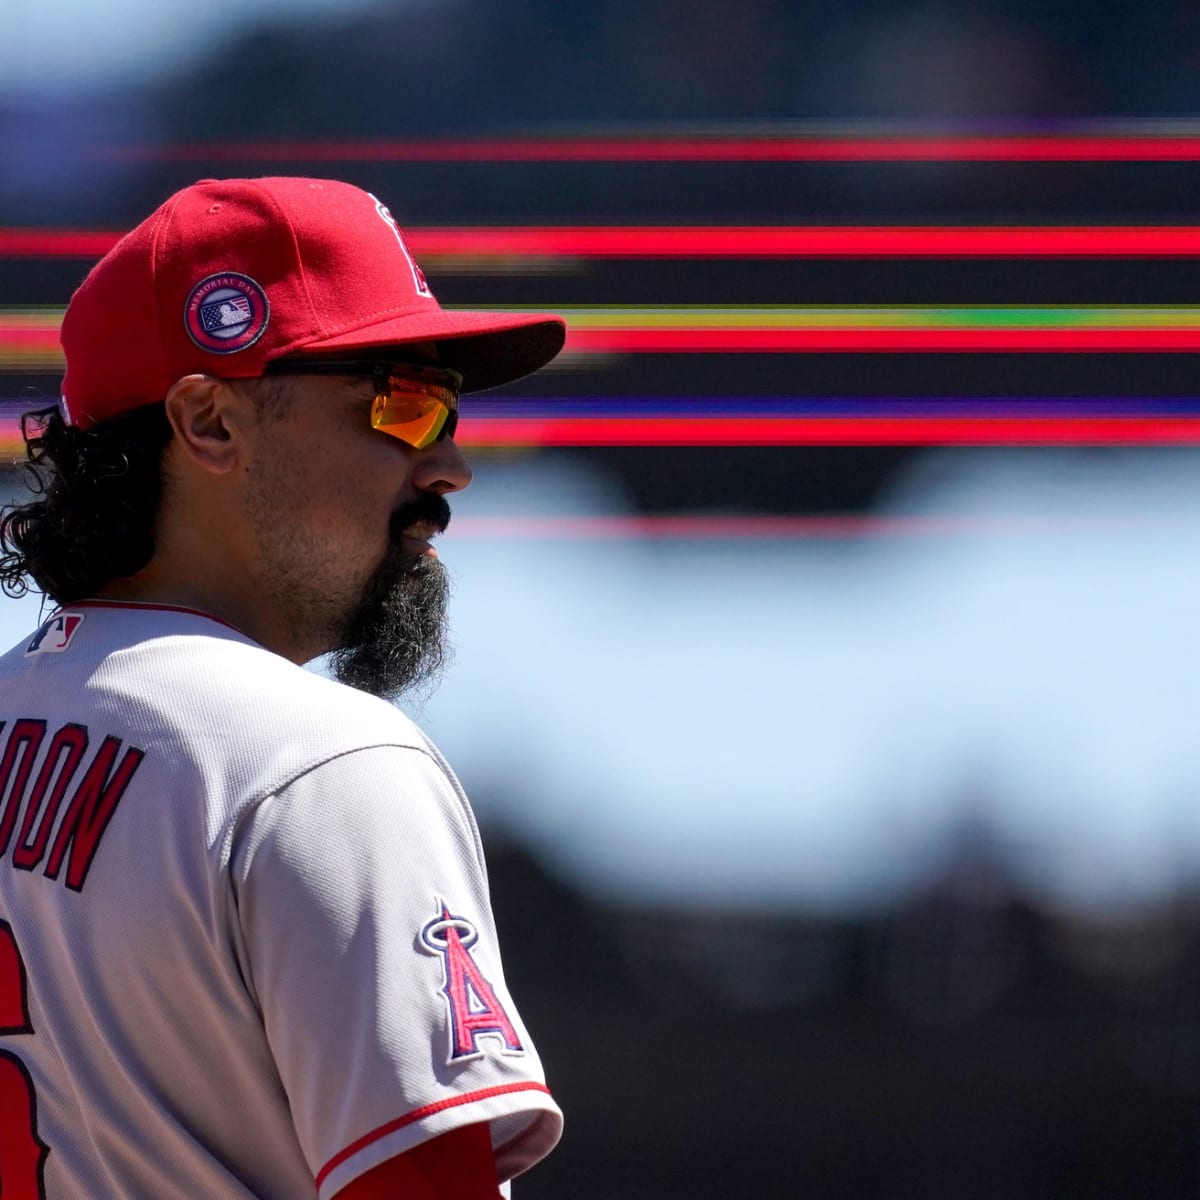 New Footage Surfaces of Anthony Rendon's Fan Altercation, Scary